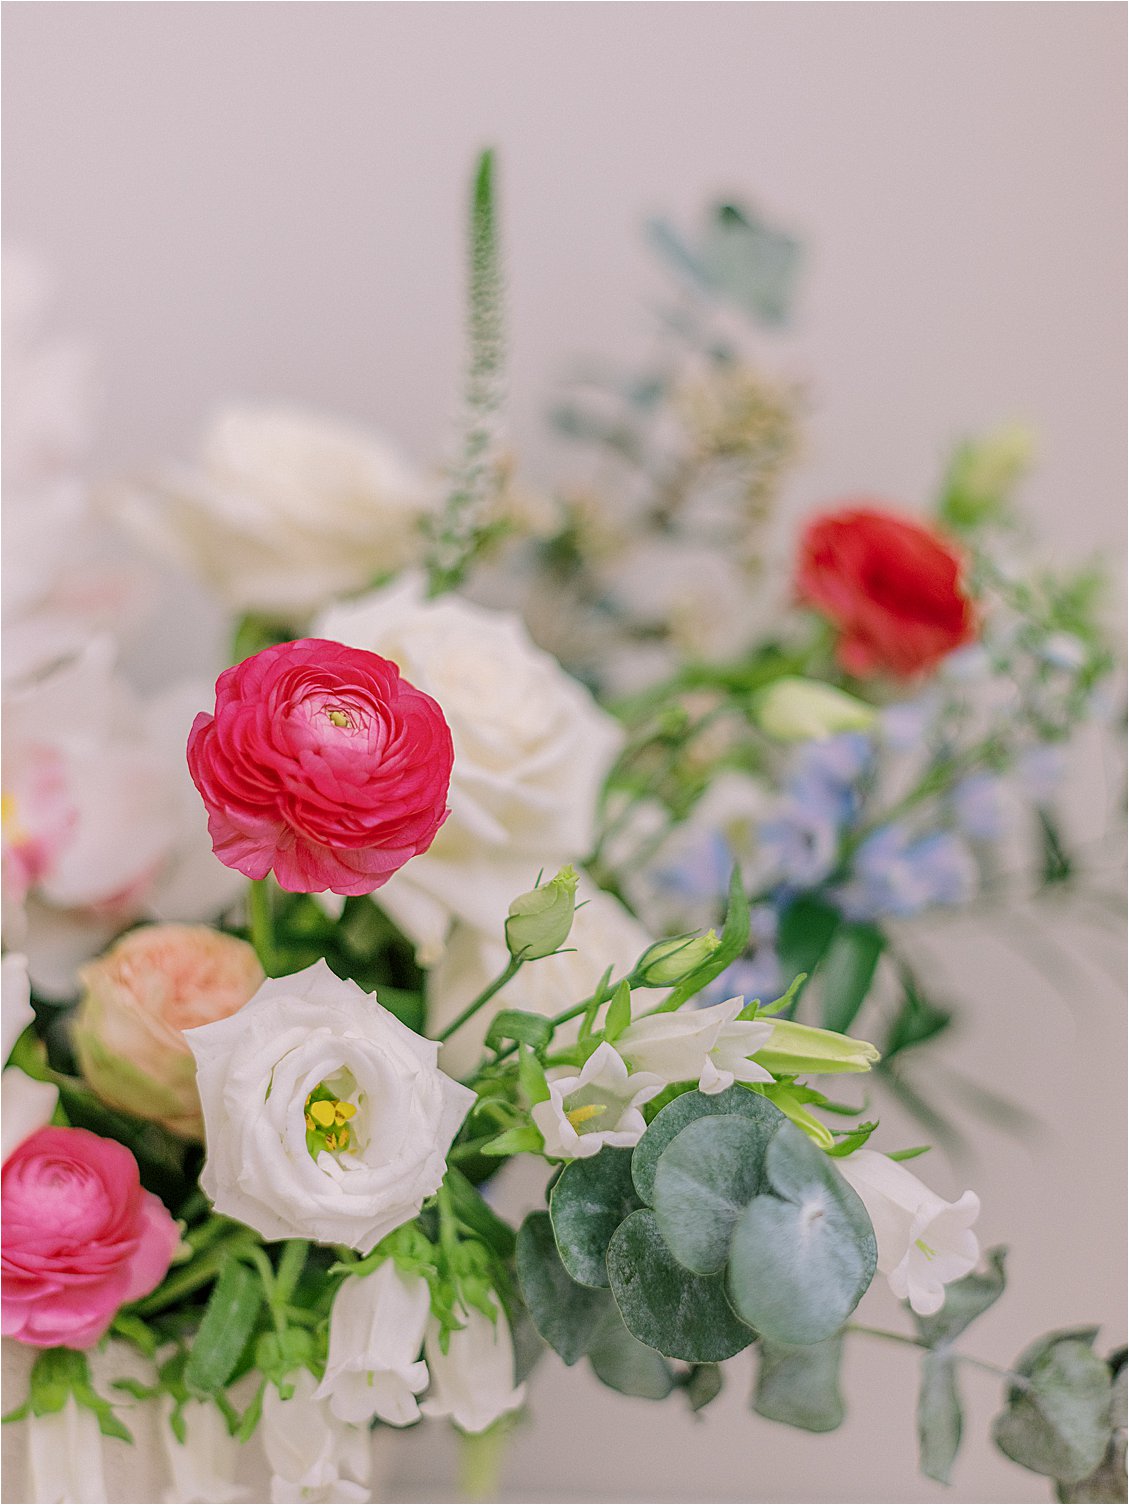 Virtual Floral Workshop with Ever After Floral Design and Miami Film Wedding Photographer, Renee Hollingshead. Spring wedding inspiration